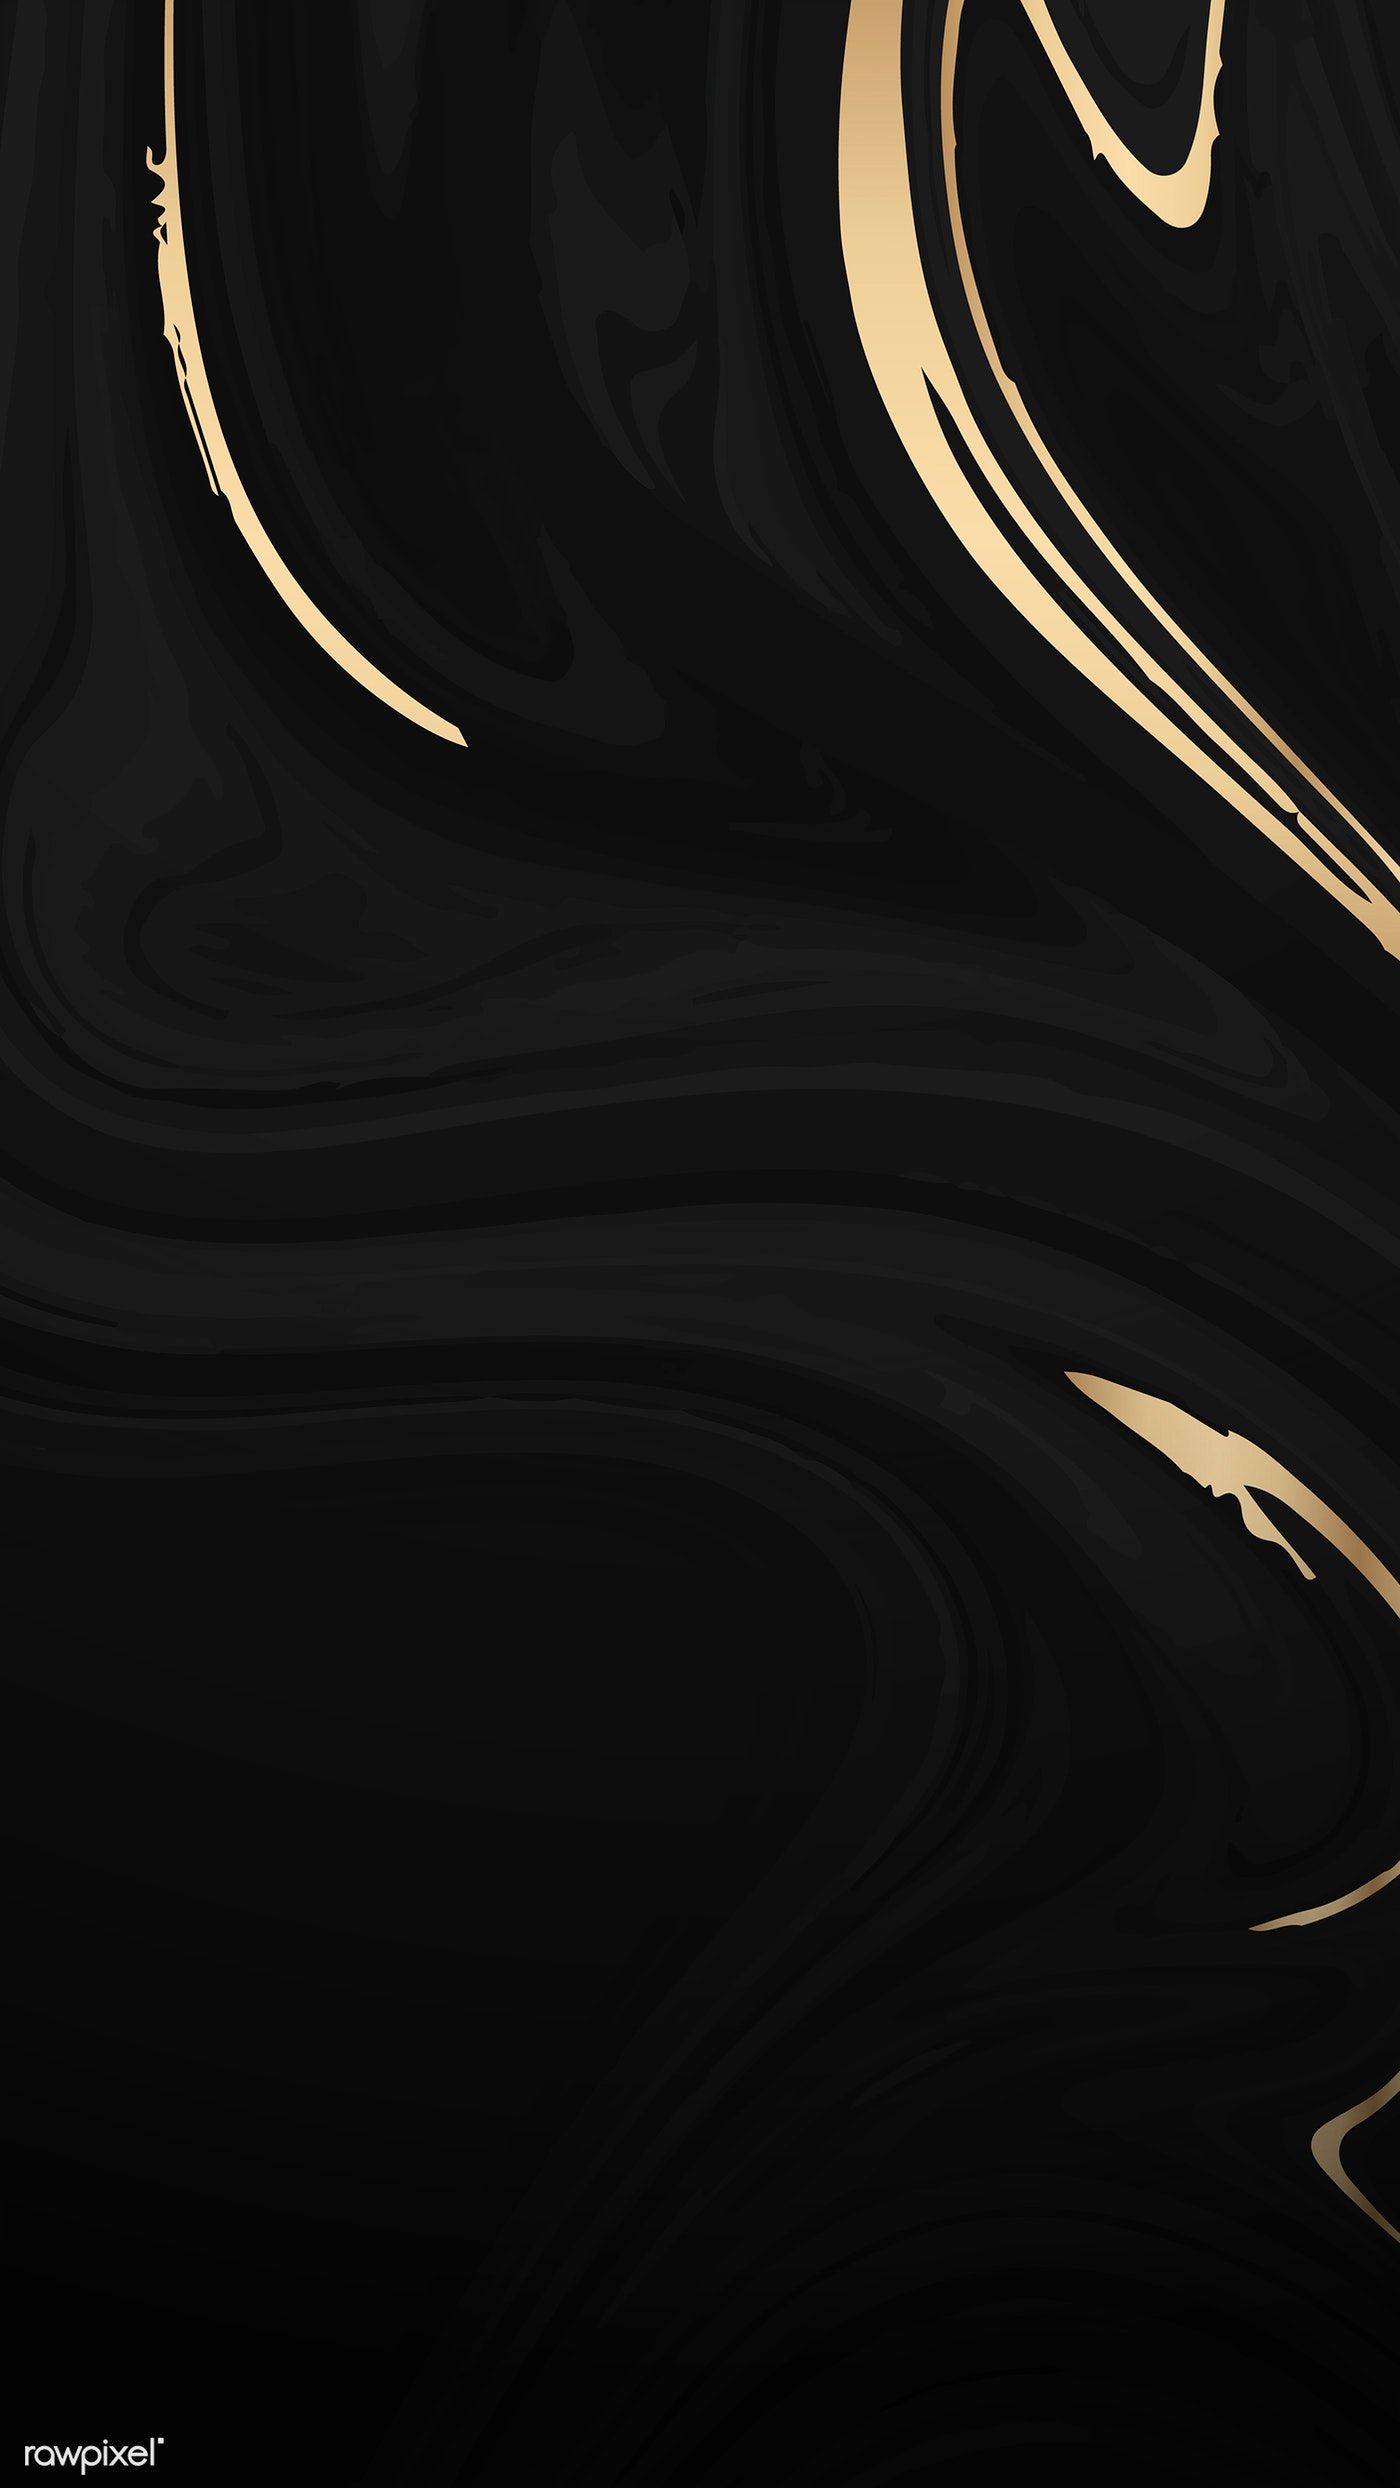 Gold and black fluid patterned mobile phone wallpaper vectorà k iphone and mobilâ gold and black background gold and black wallpaper black background wallpaper